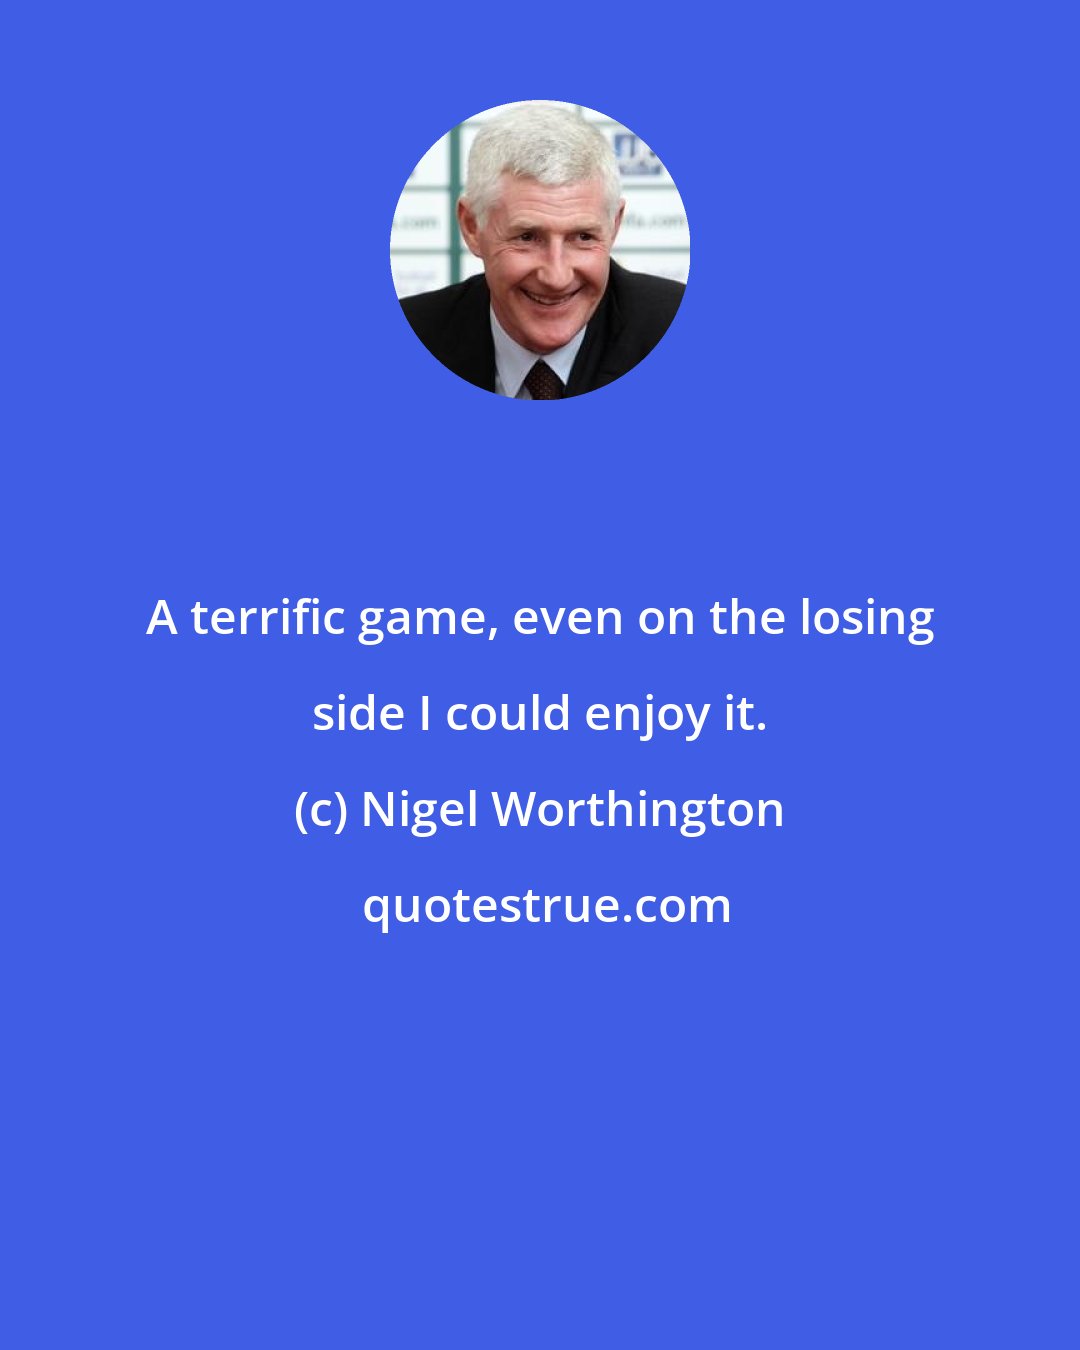 Nigel Worthington: A terrific game, even on the losing side I could enjoy it.